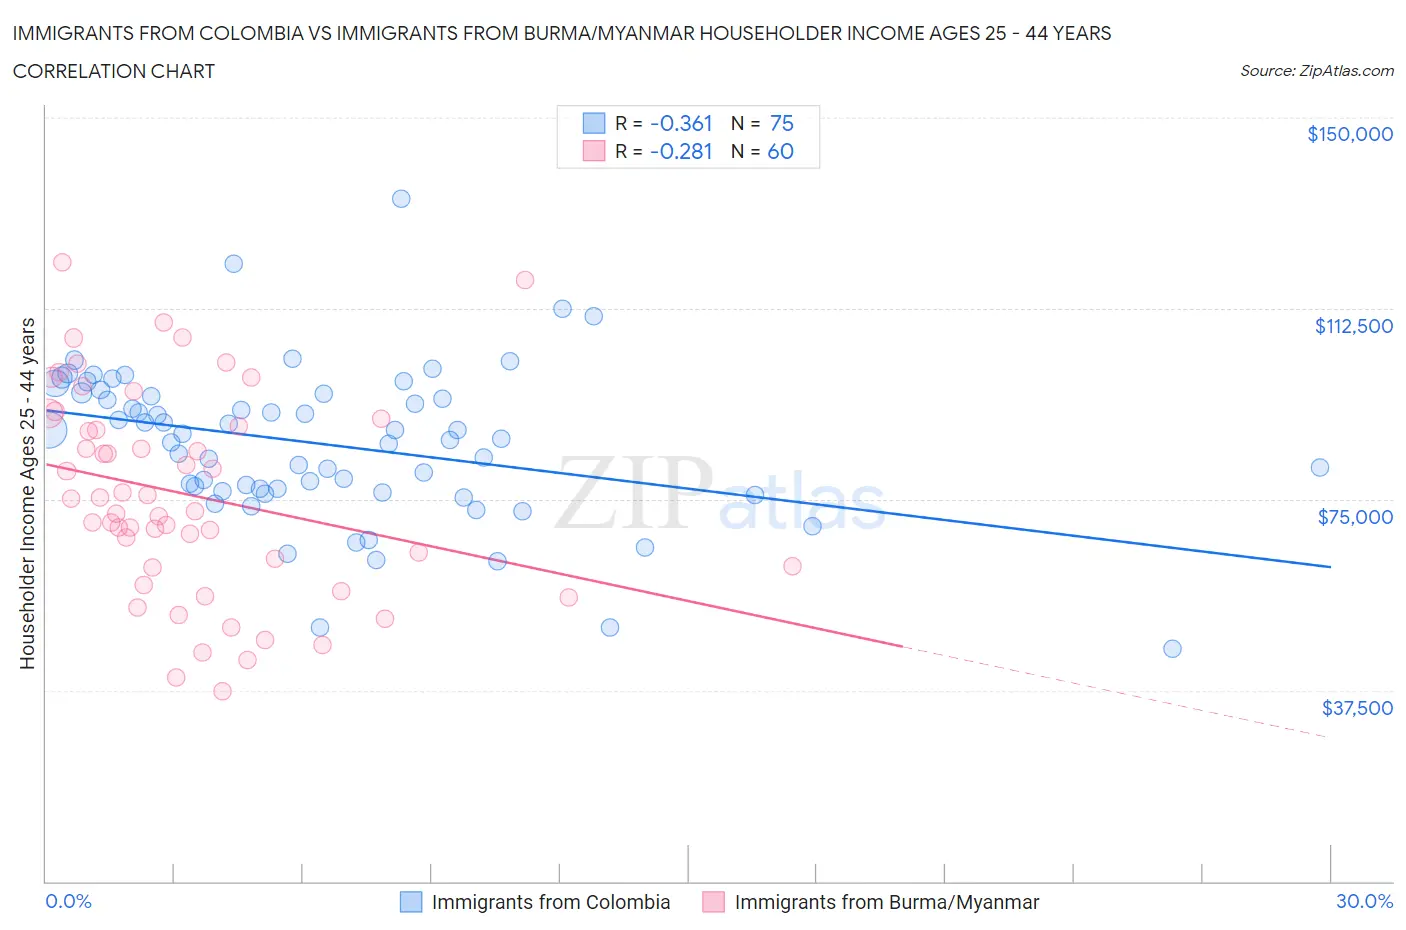 Immigrants from Colombia vs Immigrants from Burma/Myanmar Householder Income Ages 25 - 44 years